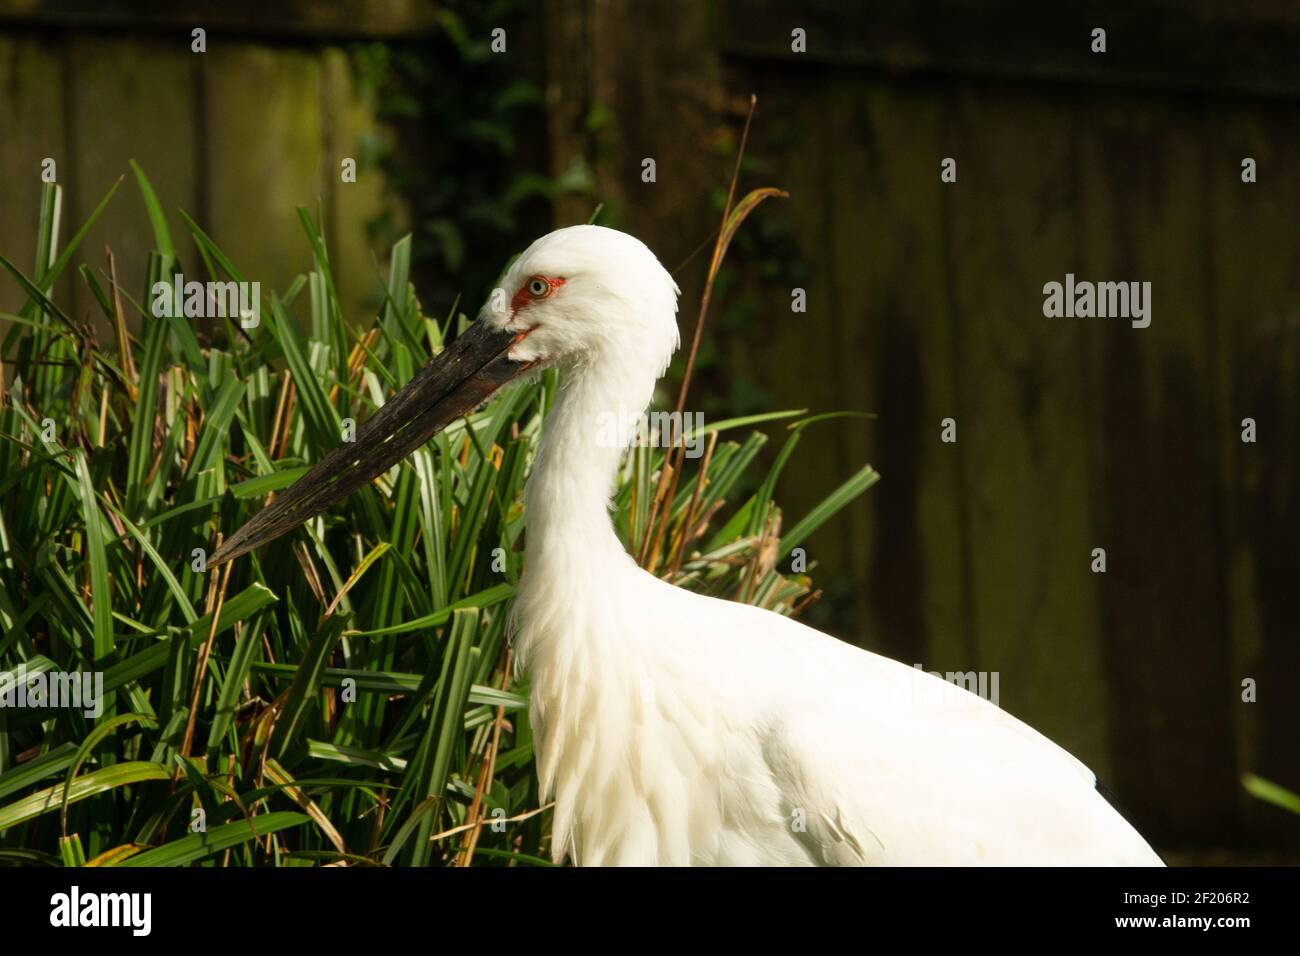 Oriental stork (Ciconia boyciana) head and shoulders of a single Oriental stork with pampas grass and a fence in the background Stock Photo